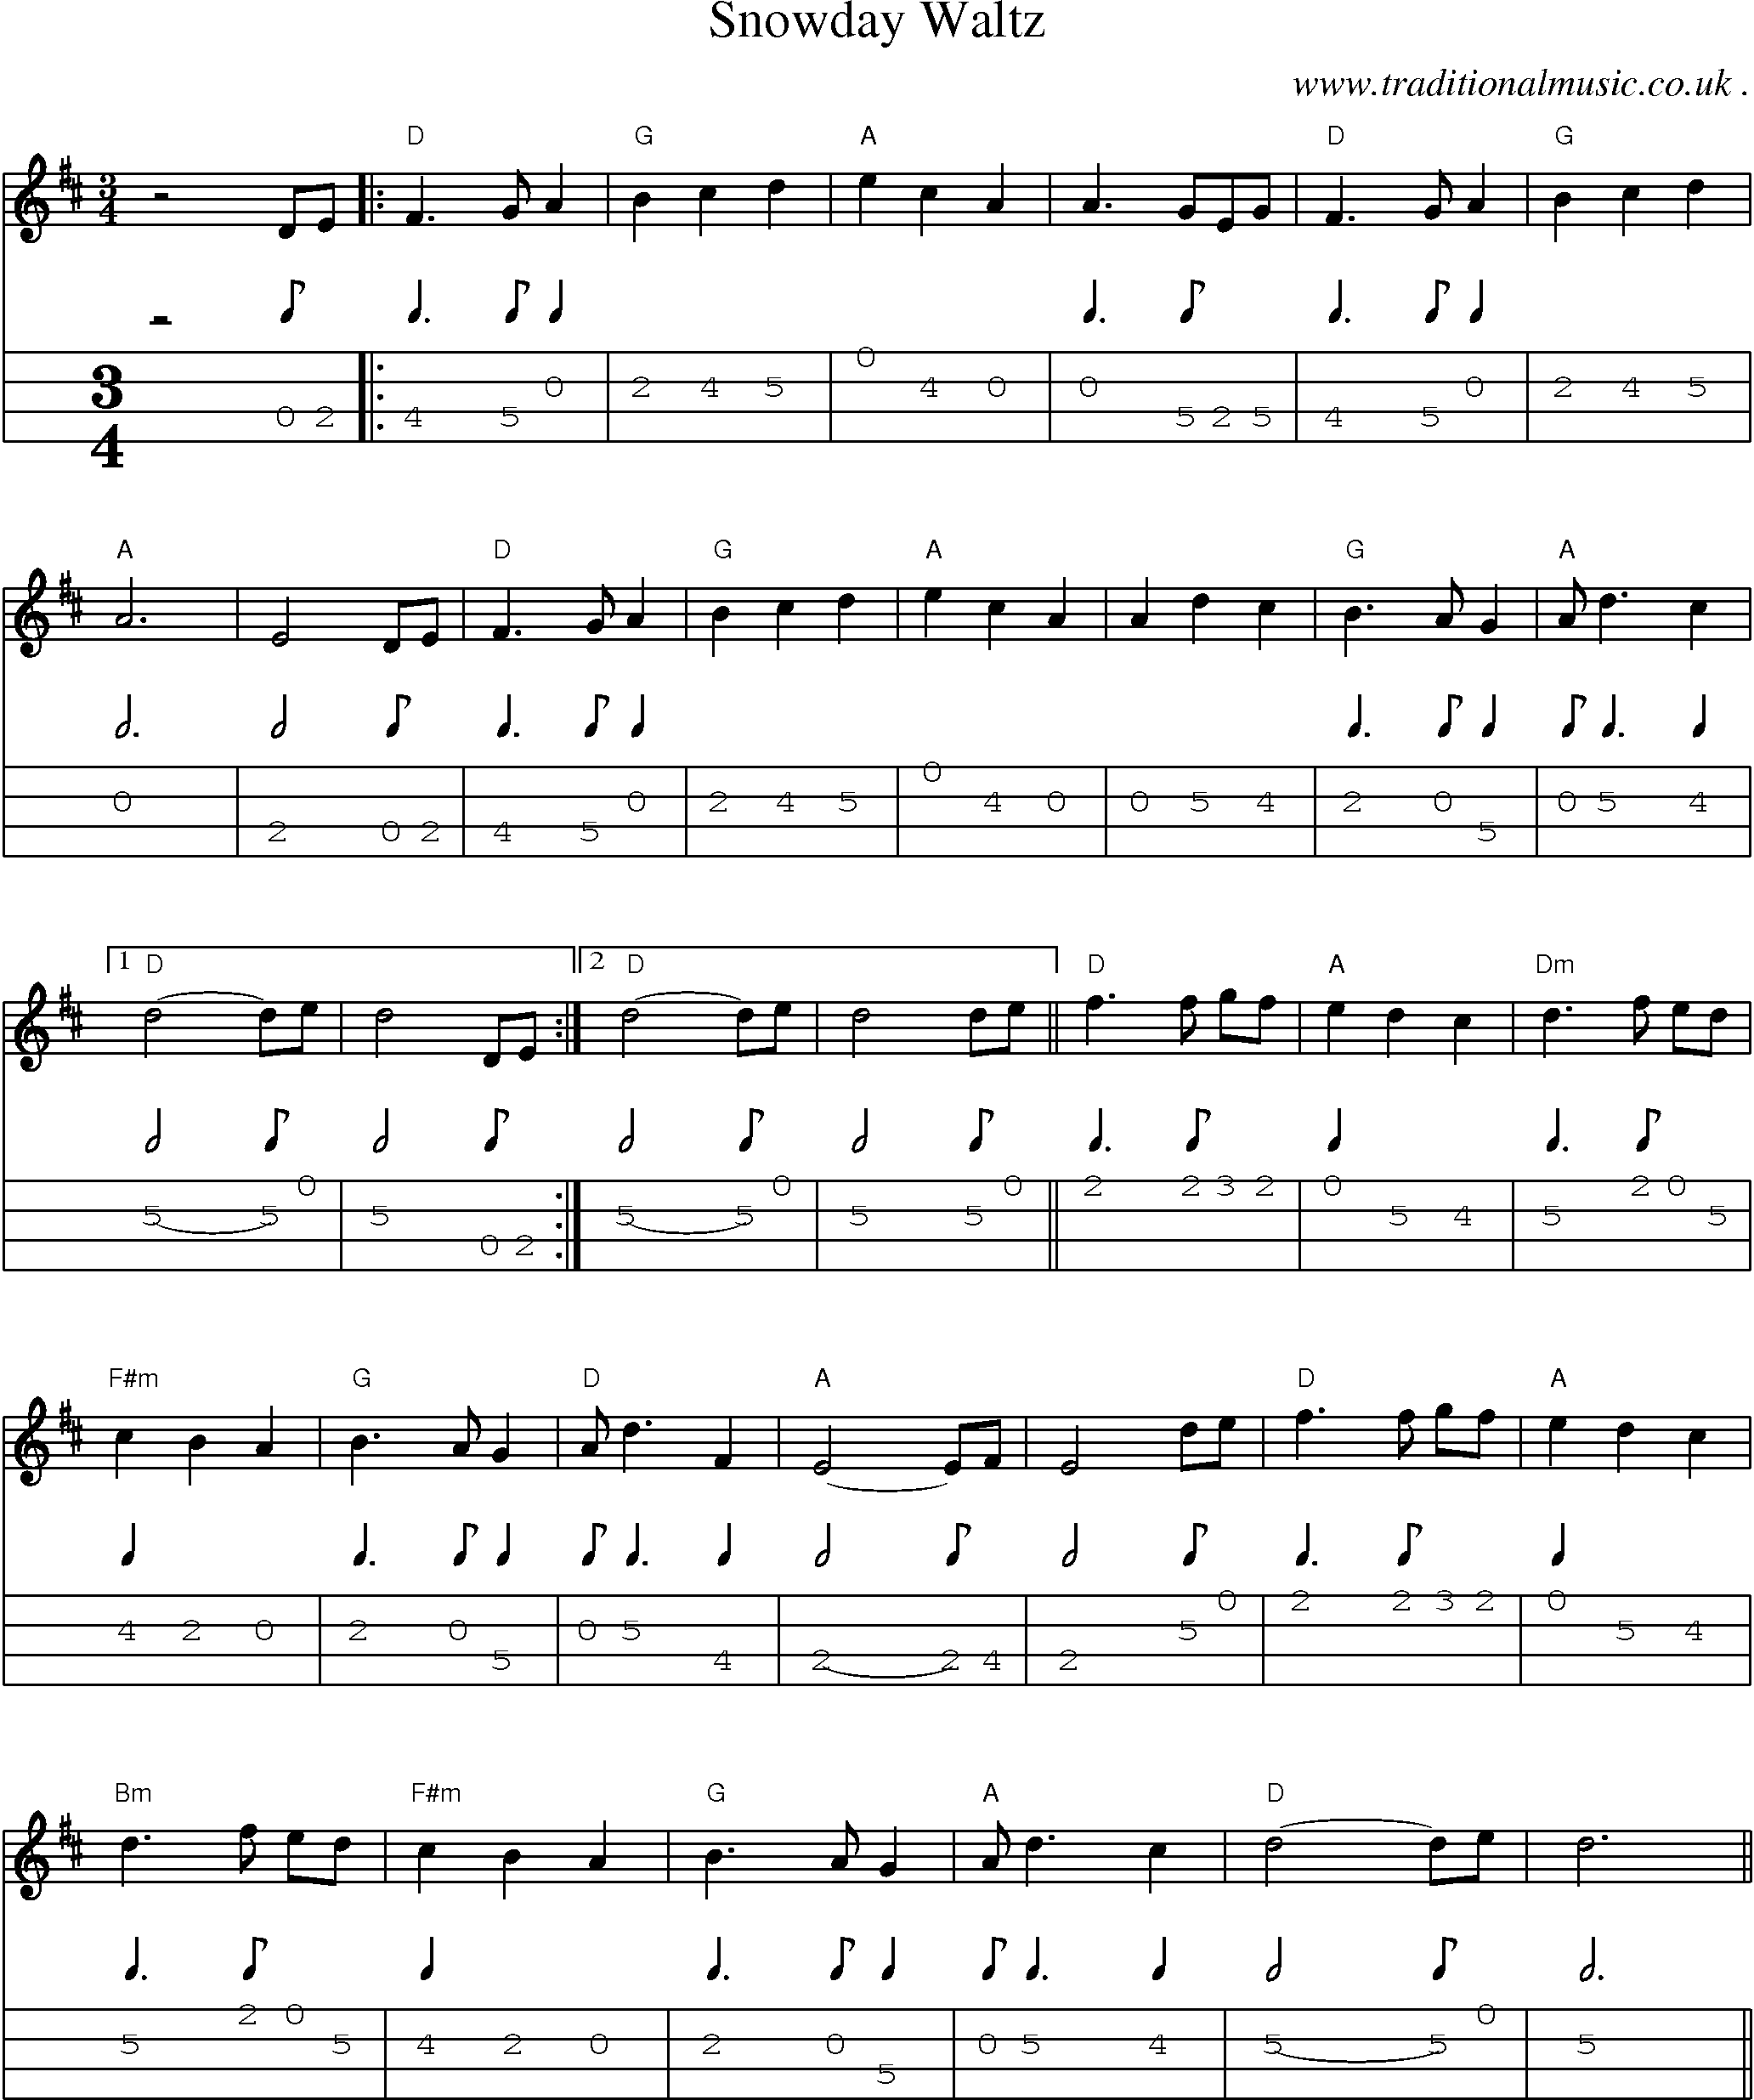 Music Score and Guitar Tabs for Snowday Waltz